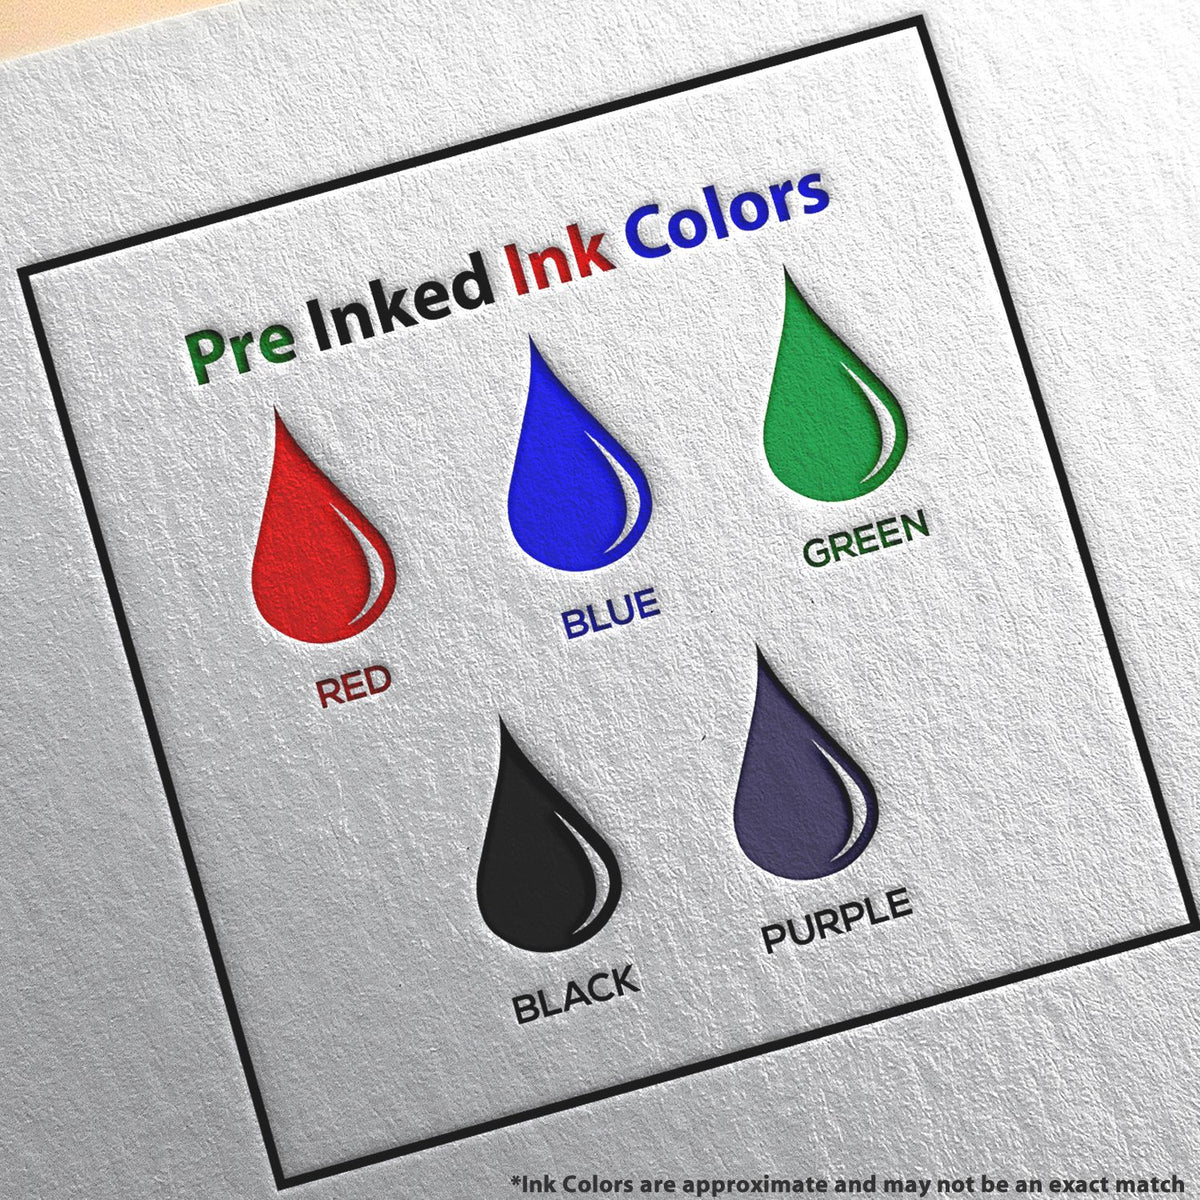 A picture showing the different ink colors or hues available for the Slim Pre-Inked Wyoming Land Surveyor Seal Stamp product.